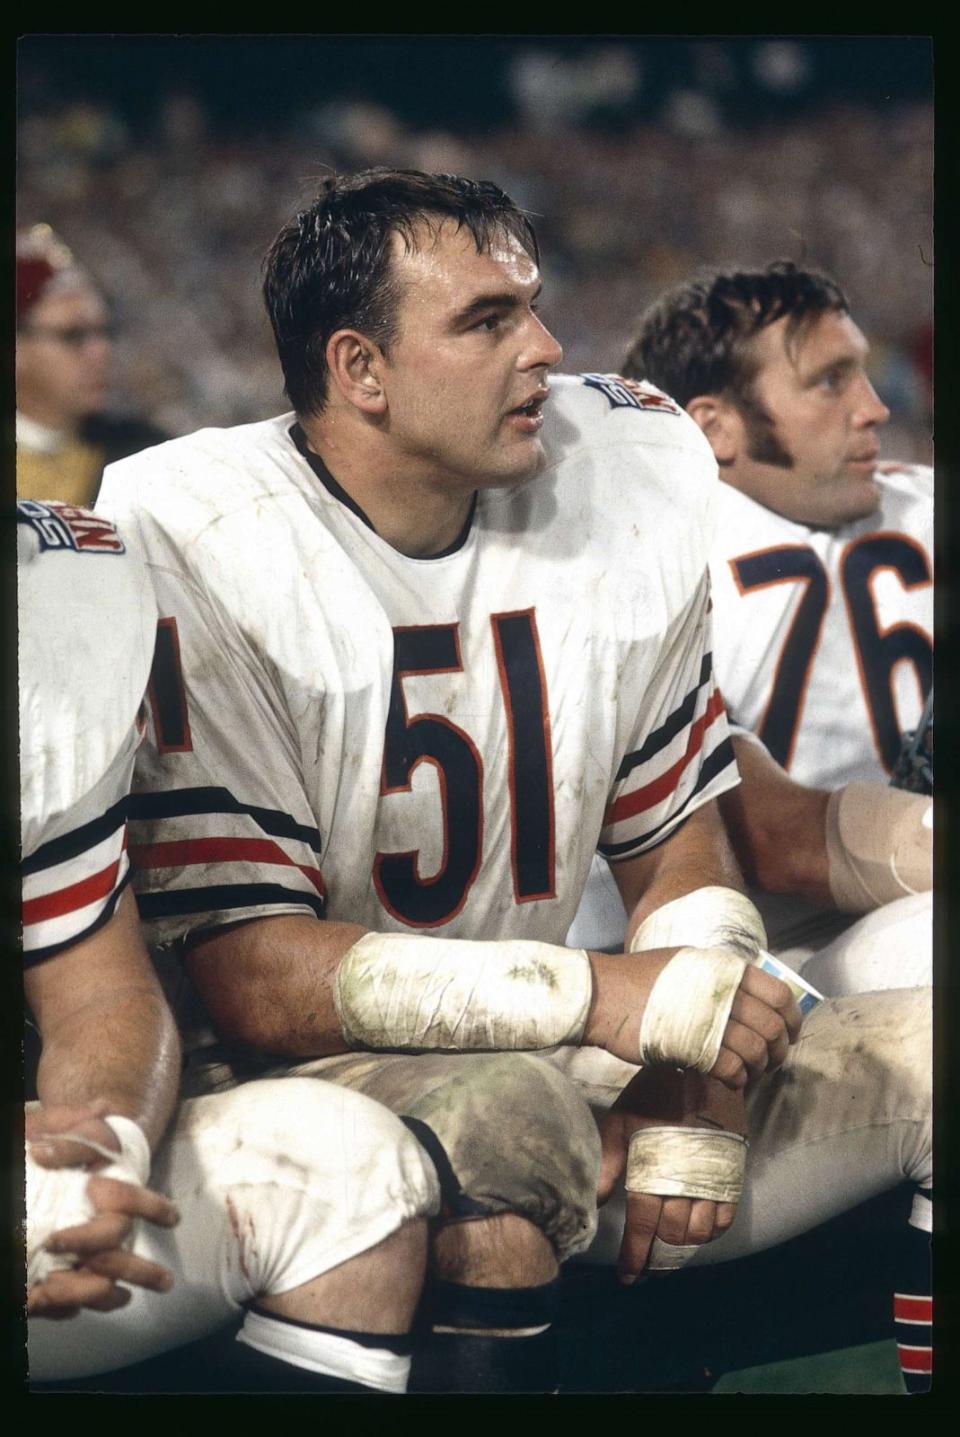 PHOTO: Dick Butkus #51 of the Chicago Bears on the bench against the Green Bay Packers in a circa mid 1960's NFL football game at Lambeau frield in Green Bay, Wisconsin. (Focus On Sport/Getty Images)